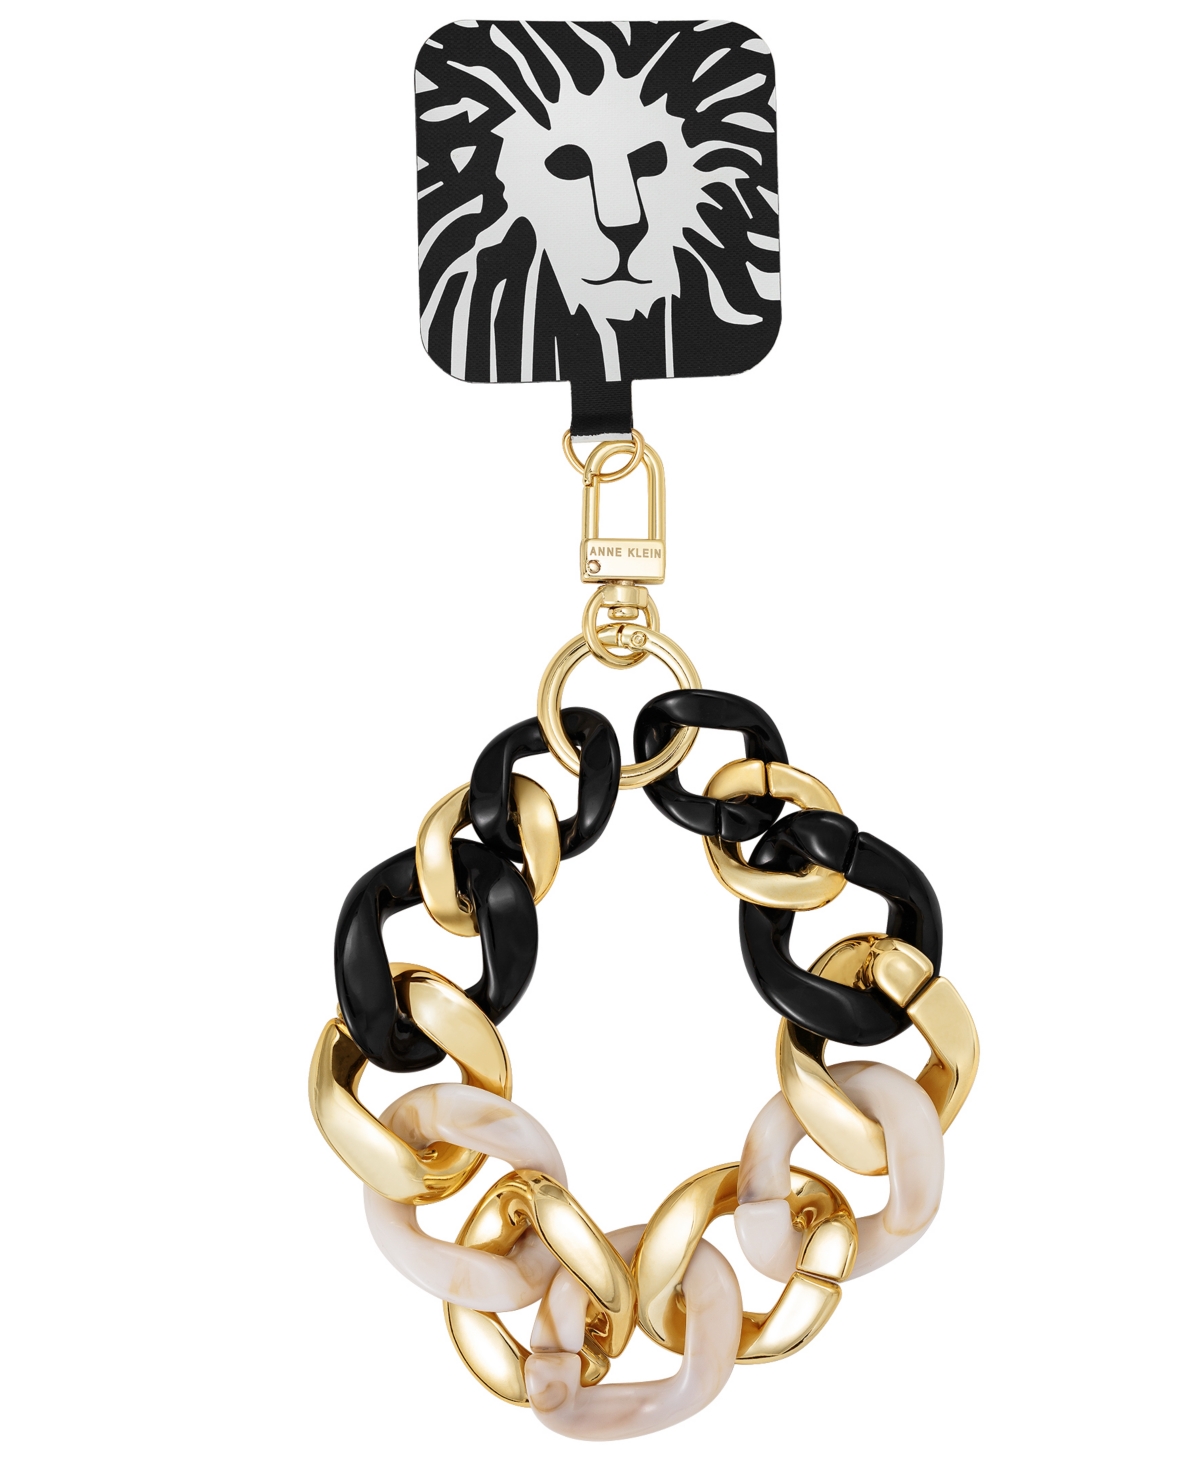 Women's Black and Ivory Acetate with Gold-Tone Alloy Chain Link Wrist Strap designed for Smart Phones